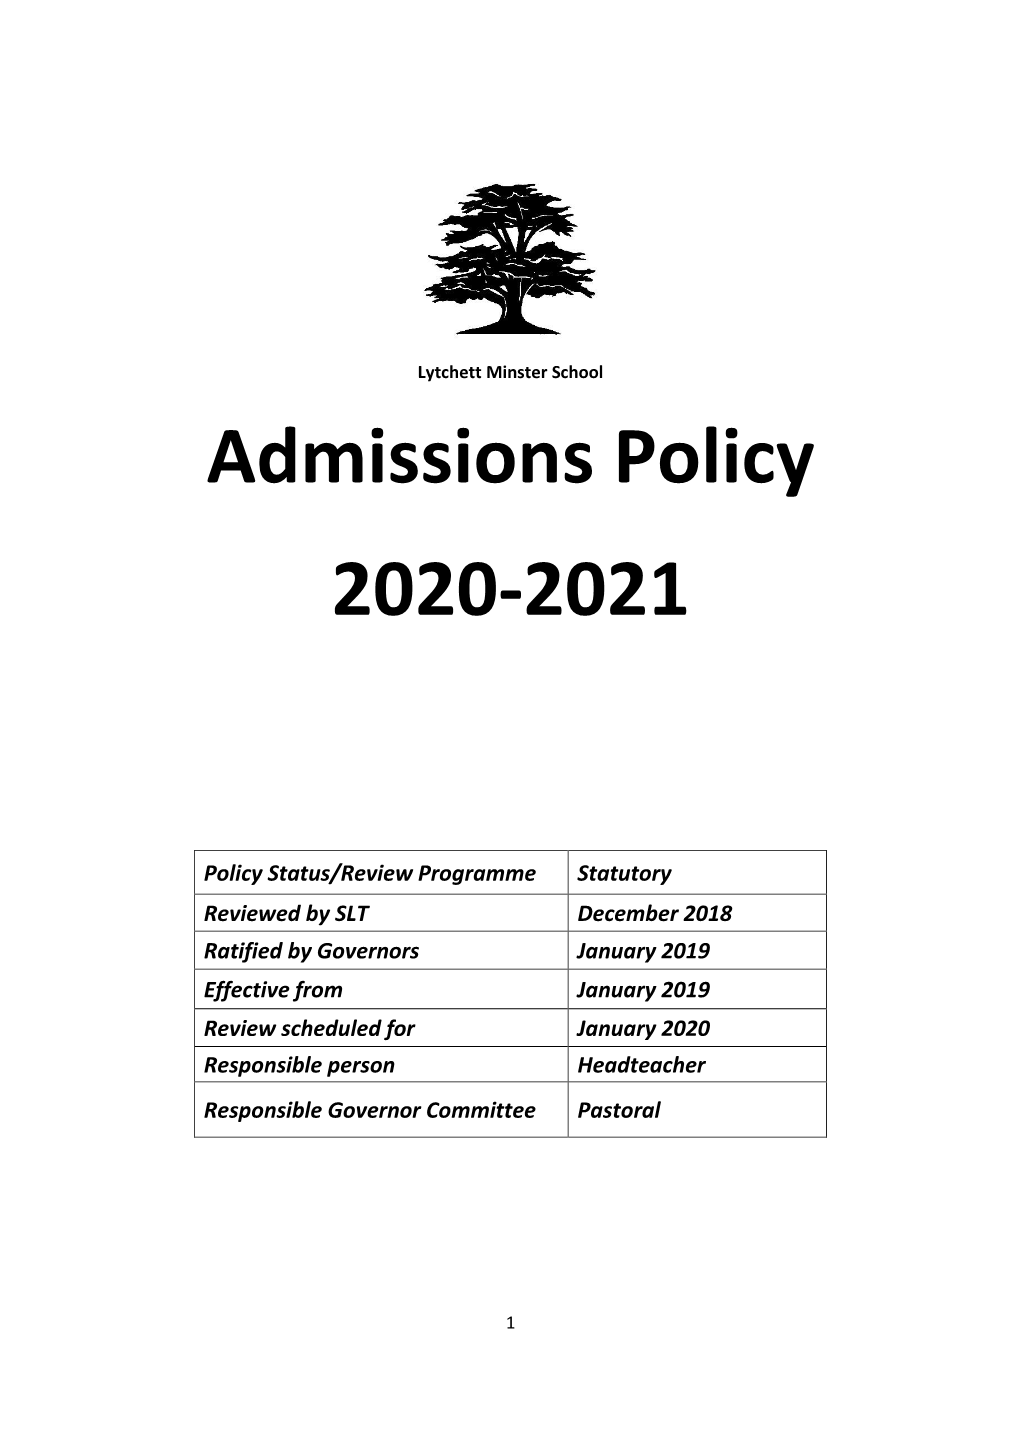 Admissions Policy 2020-2021